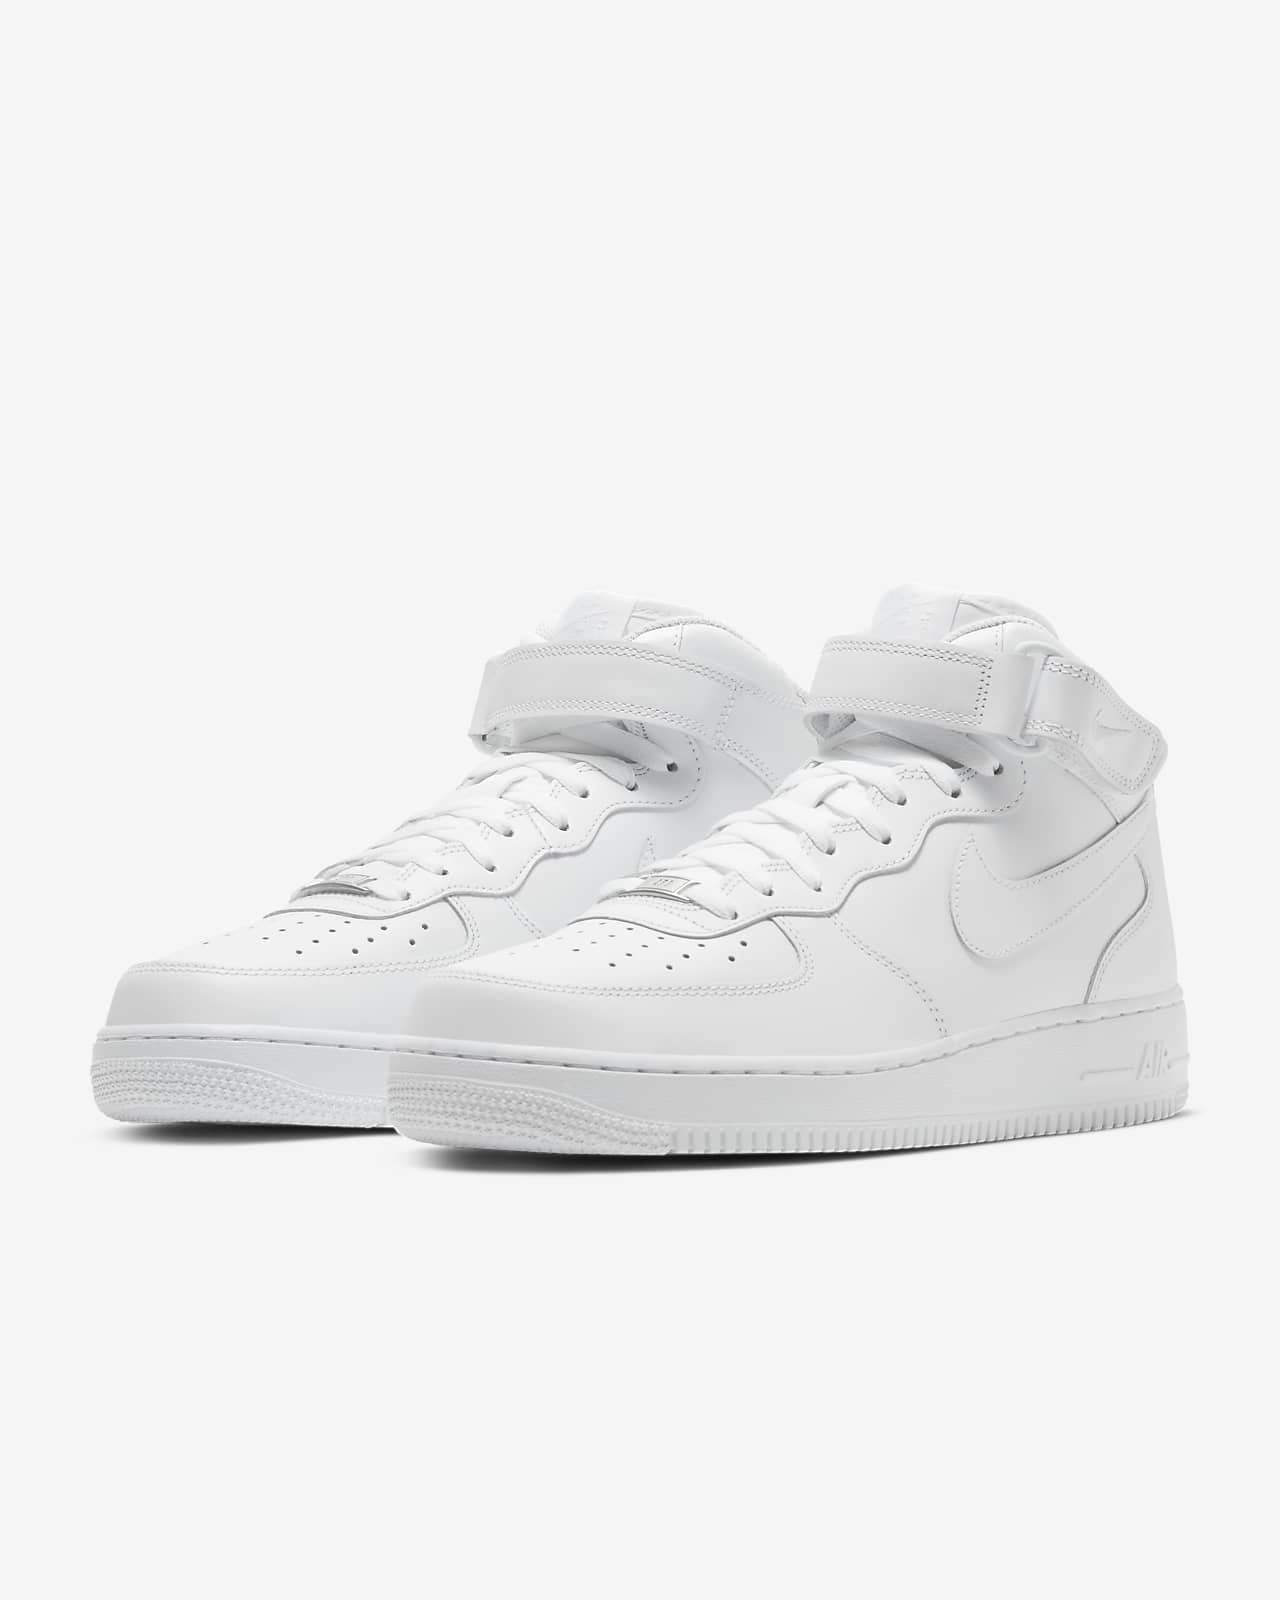 nike uptowns all white